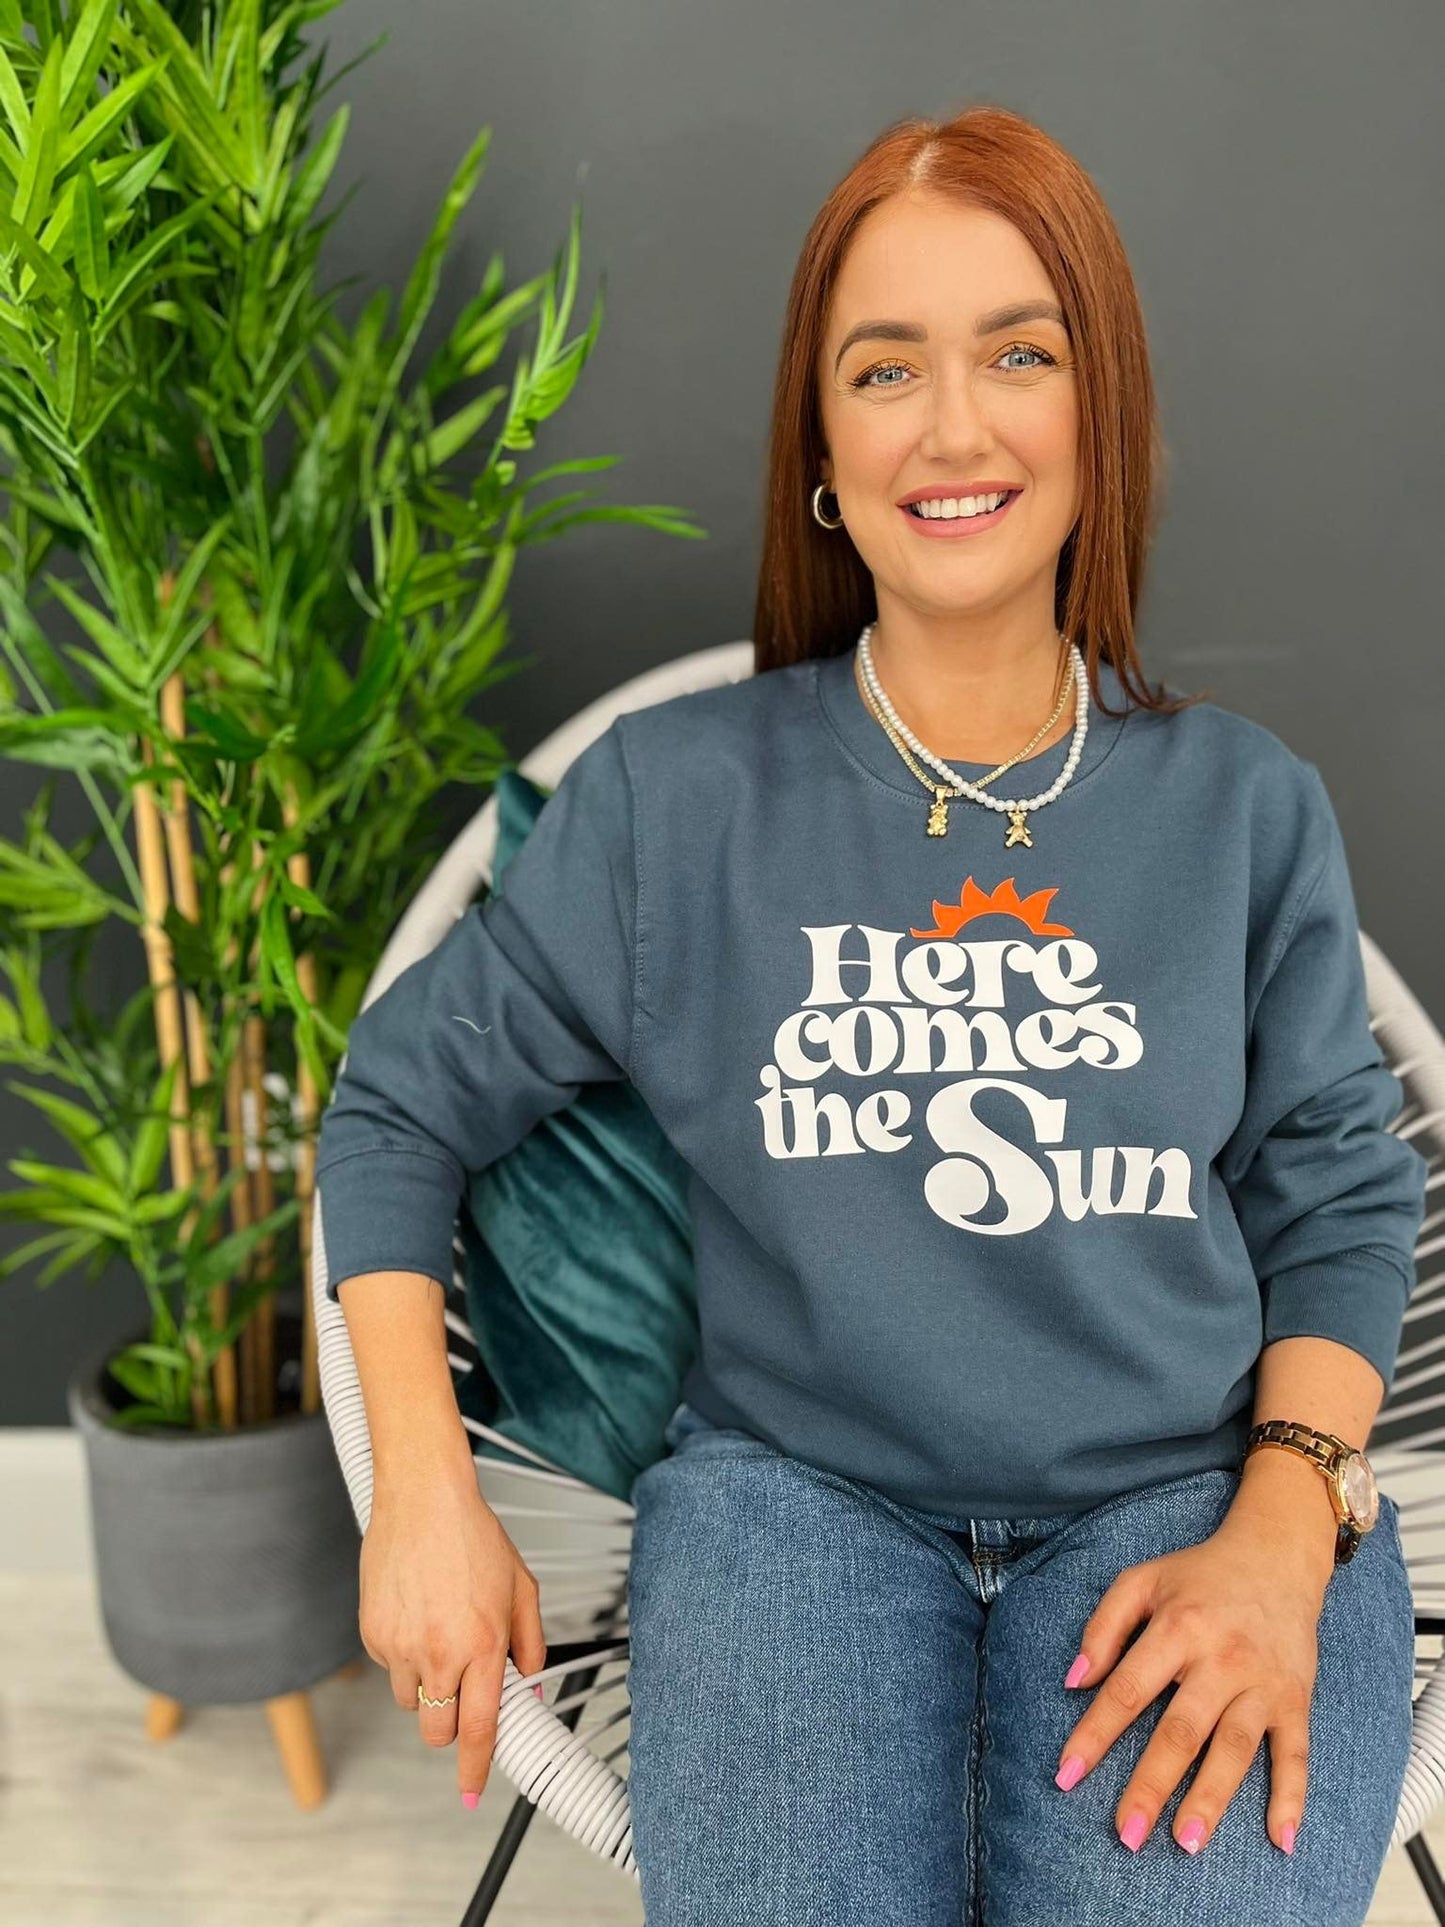 SALE | SMALL HERE COMES THE SUN SWEATER | AIRFORCE BLUE WITH WHITE TEXT